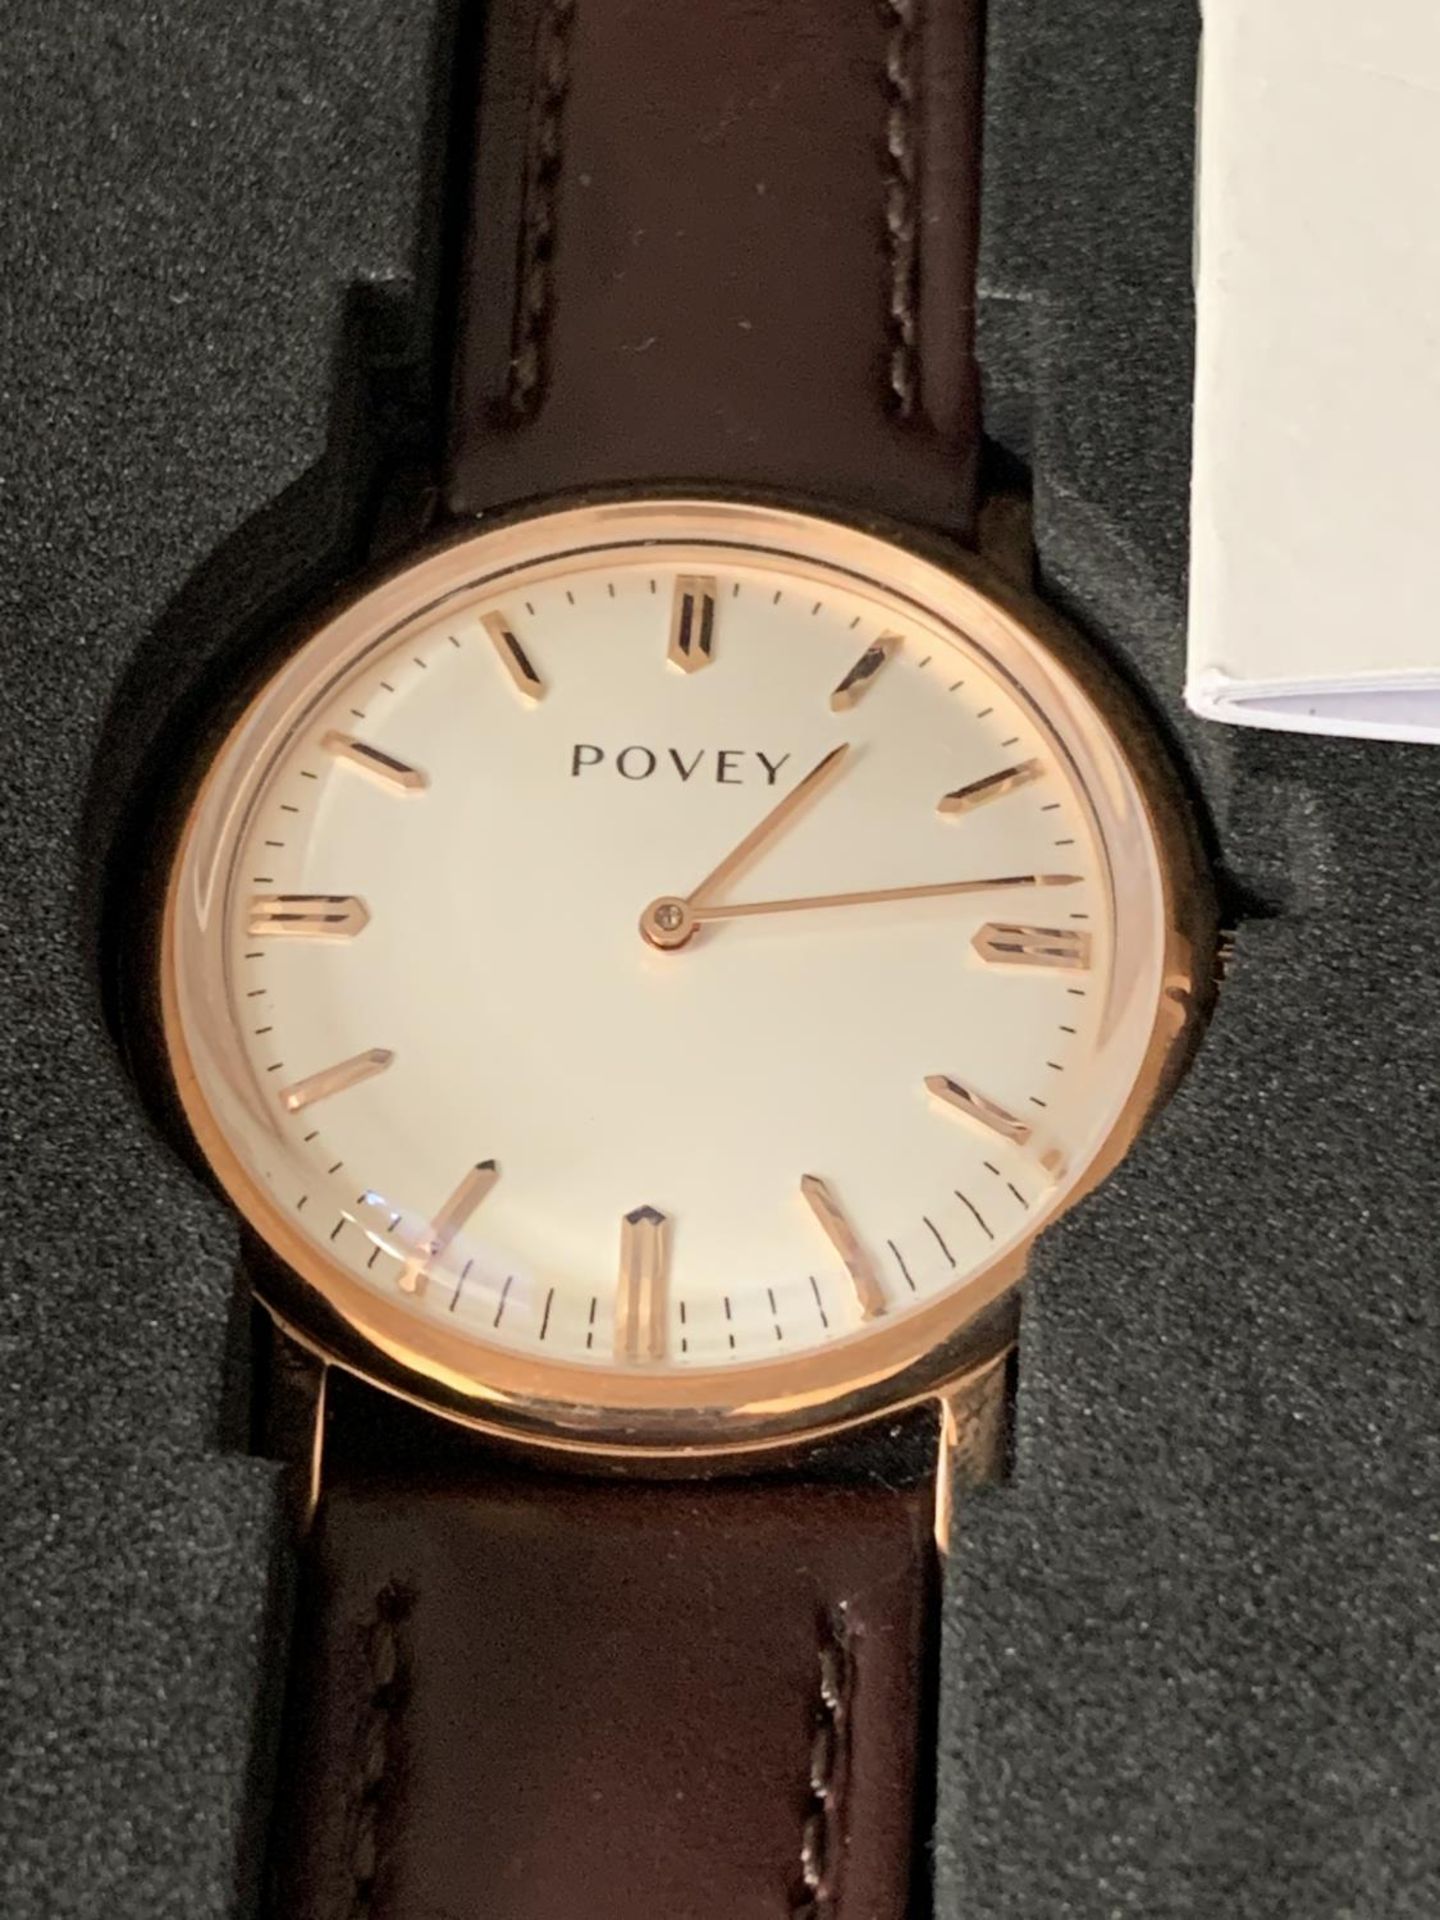 AN AS NEW AND BOXED POVEY WRIST WATCH SEEN WORKING BUT NO WARRANTY - Bild 2 aus 2